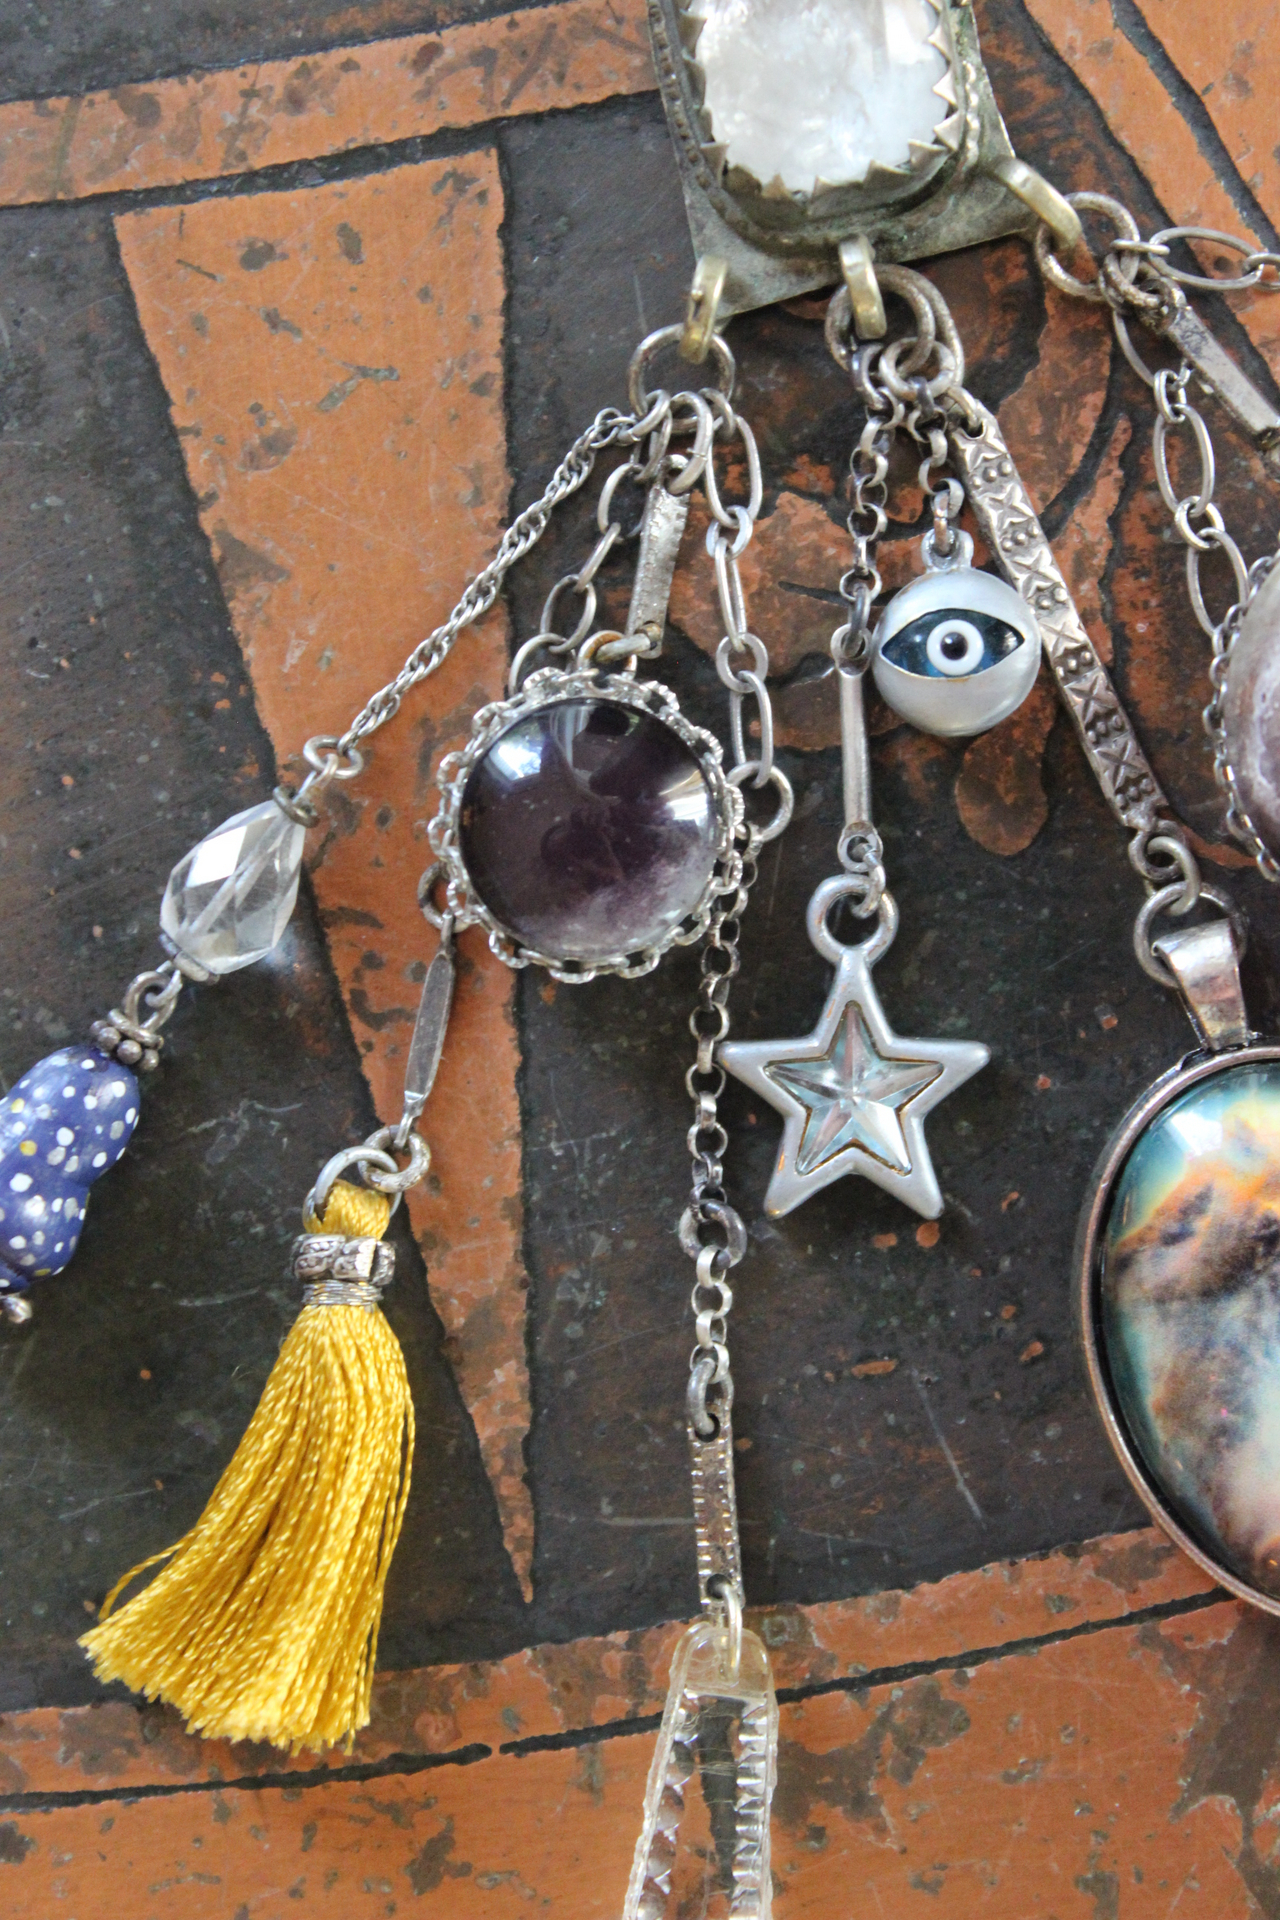 Peace in Your Soul Necklace with Pillars of Creation Pendant, Moon Orbs, Faceted Rock Quartz, Tiny Eye of God and Much More!